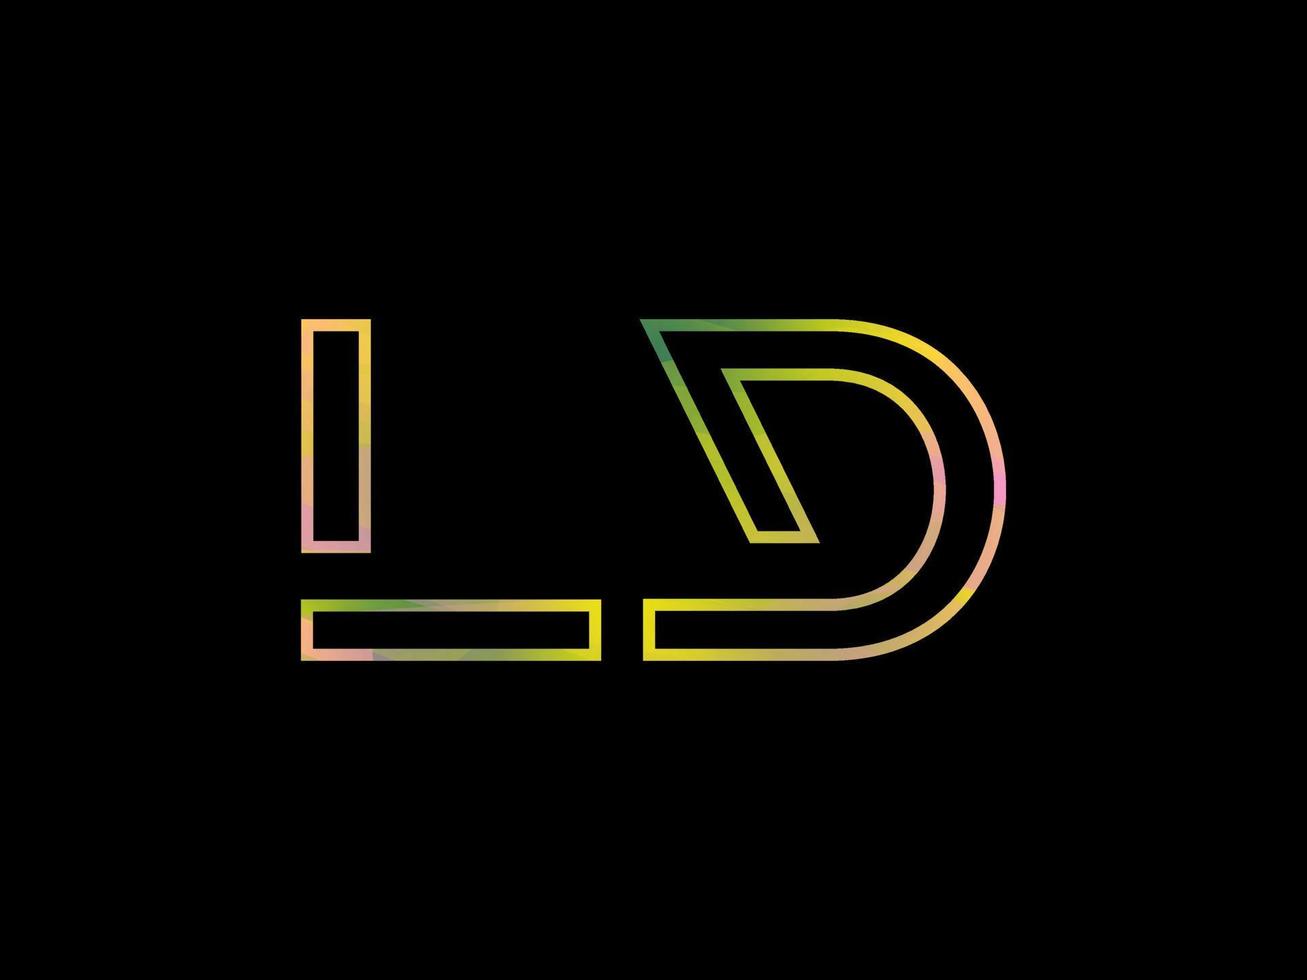 LD Letter Logo With Colorful Rainbow Texture Vector. Pro vector. vector